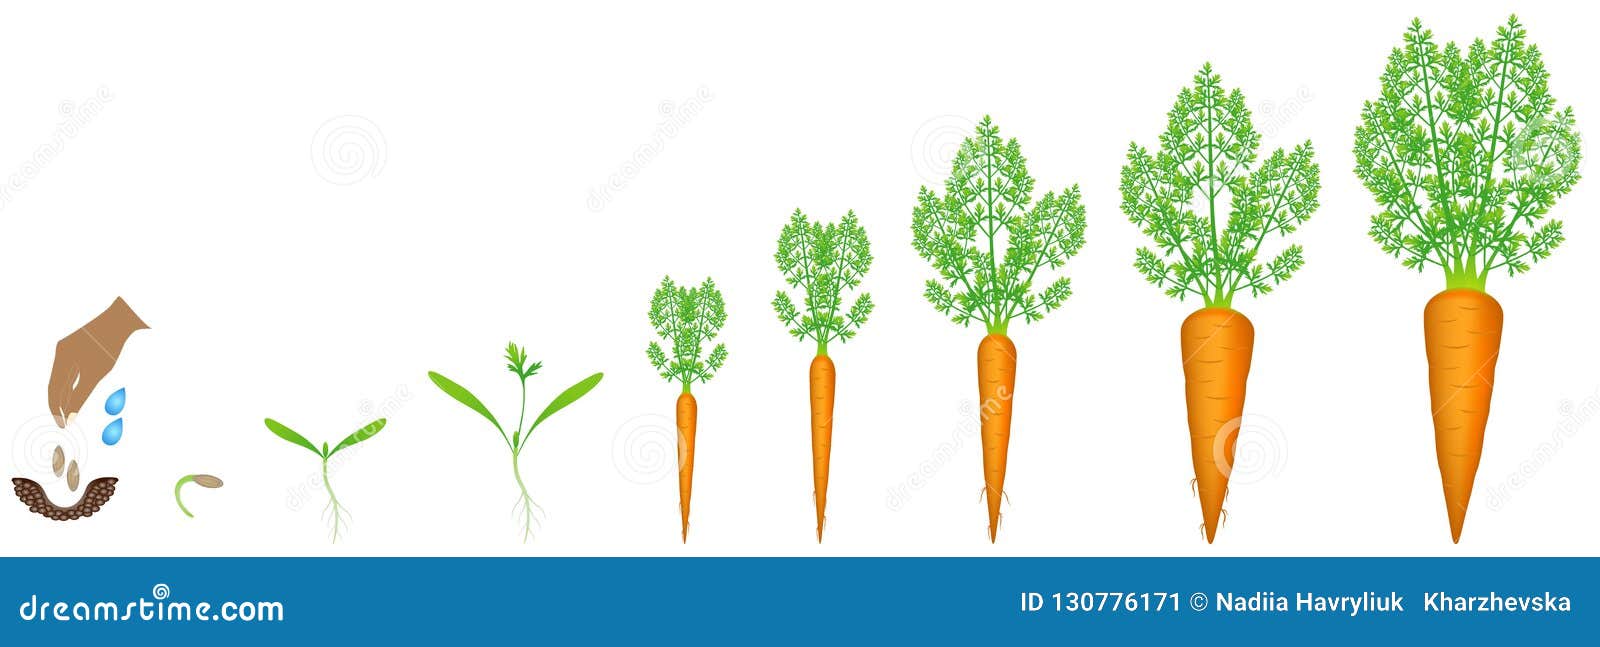 Stages Of Carrot Growth From Seed In The Garden To Maturation And ...